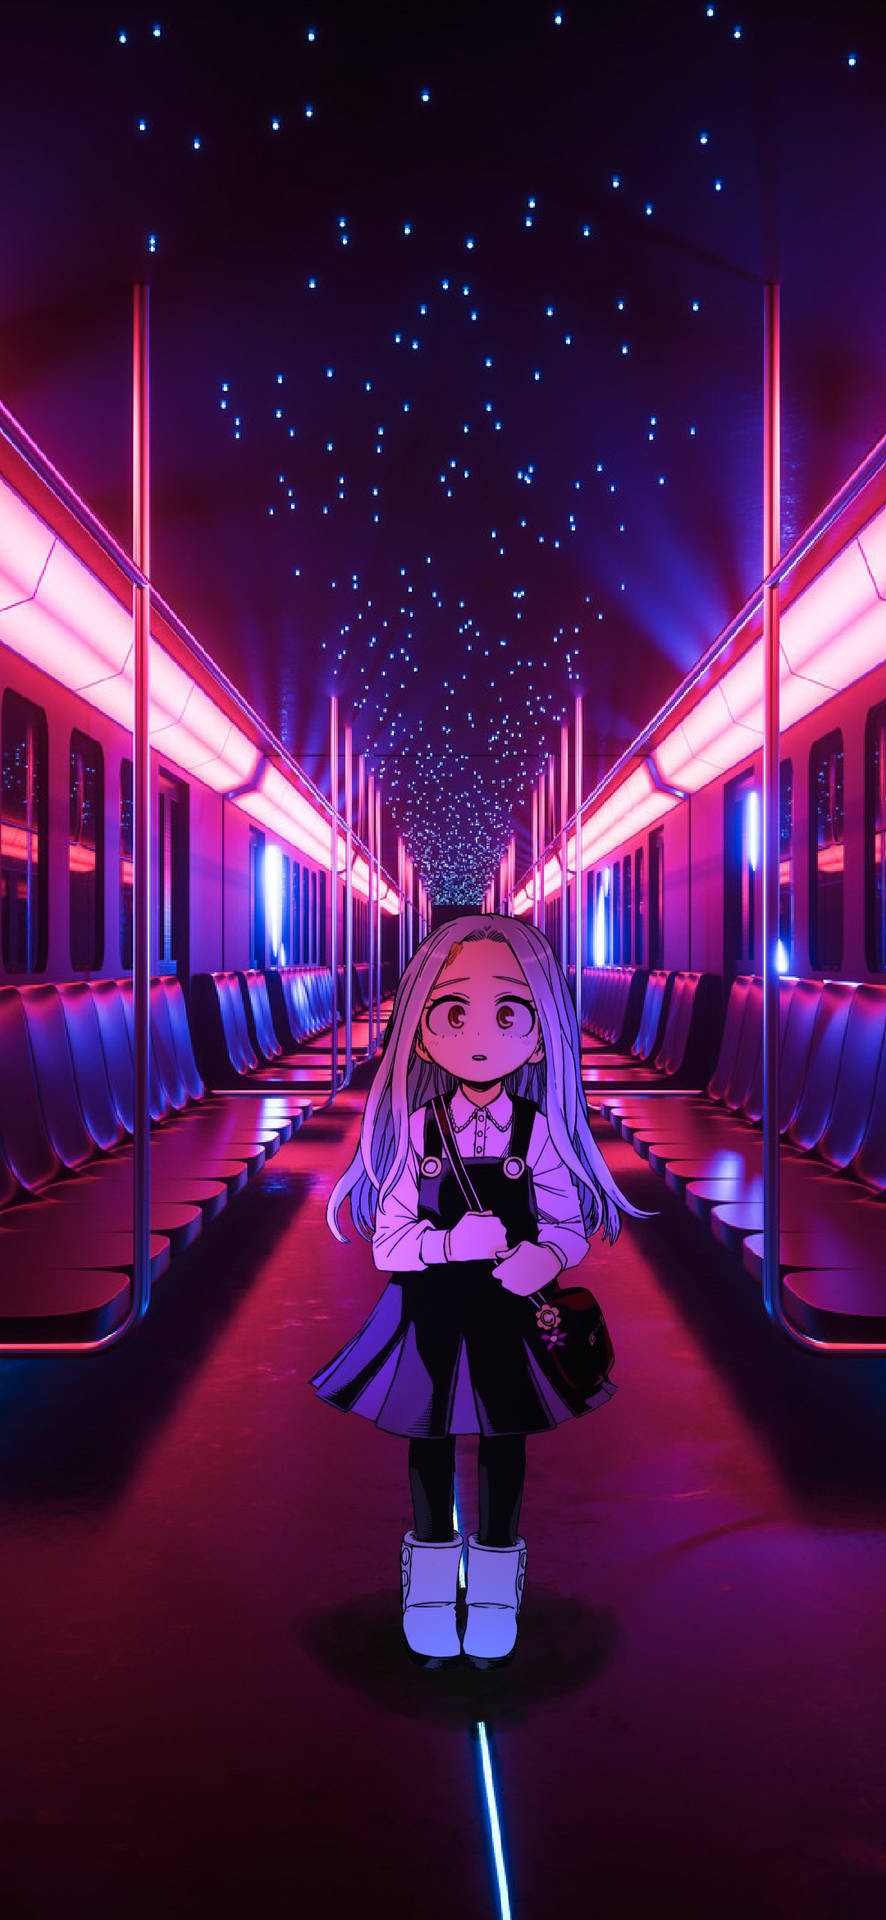 Eri On Colorful Neon Pink Train Background